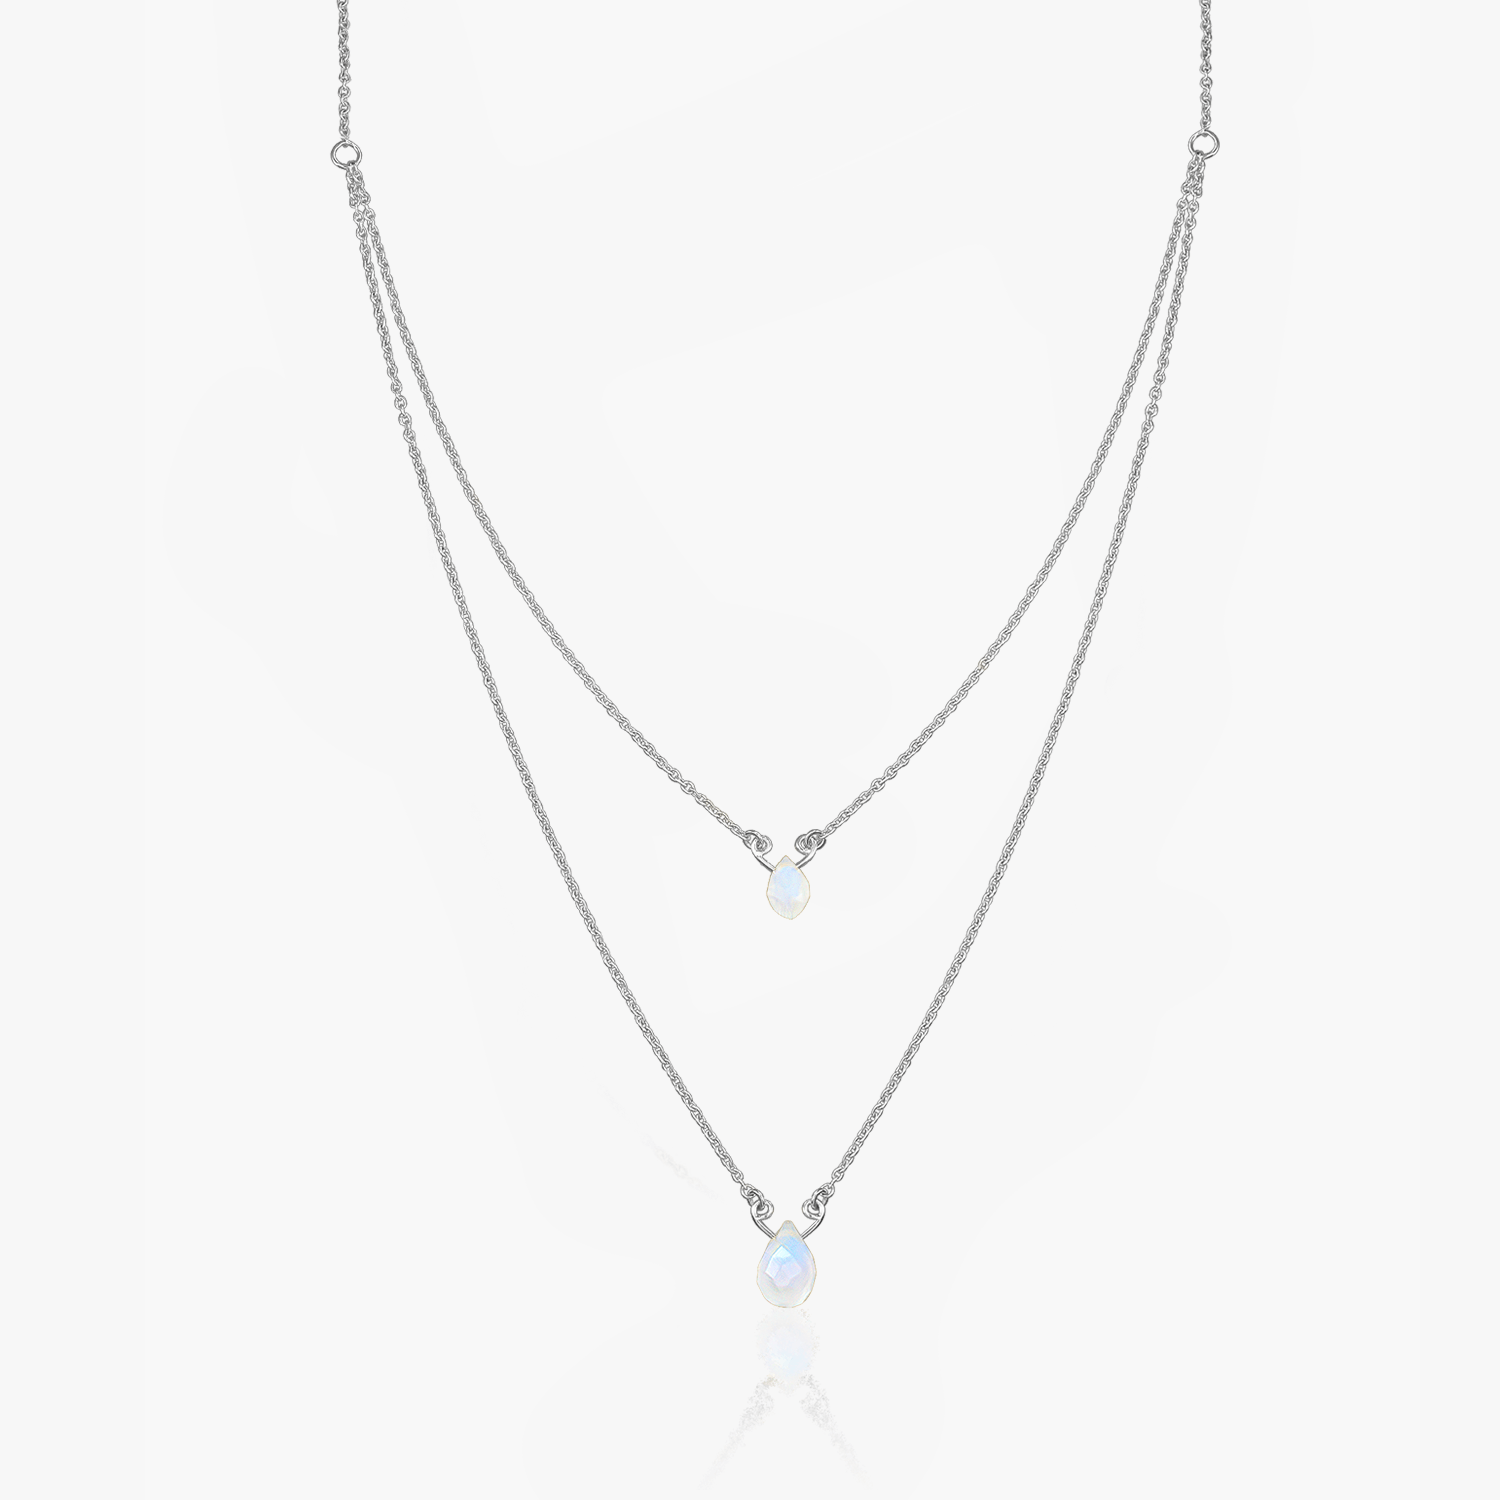 Double Rainbow silver necklace - Moonstone